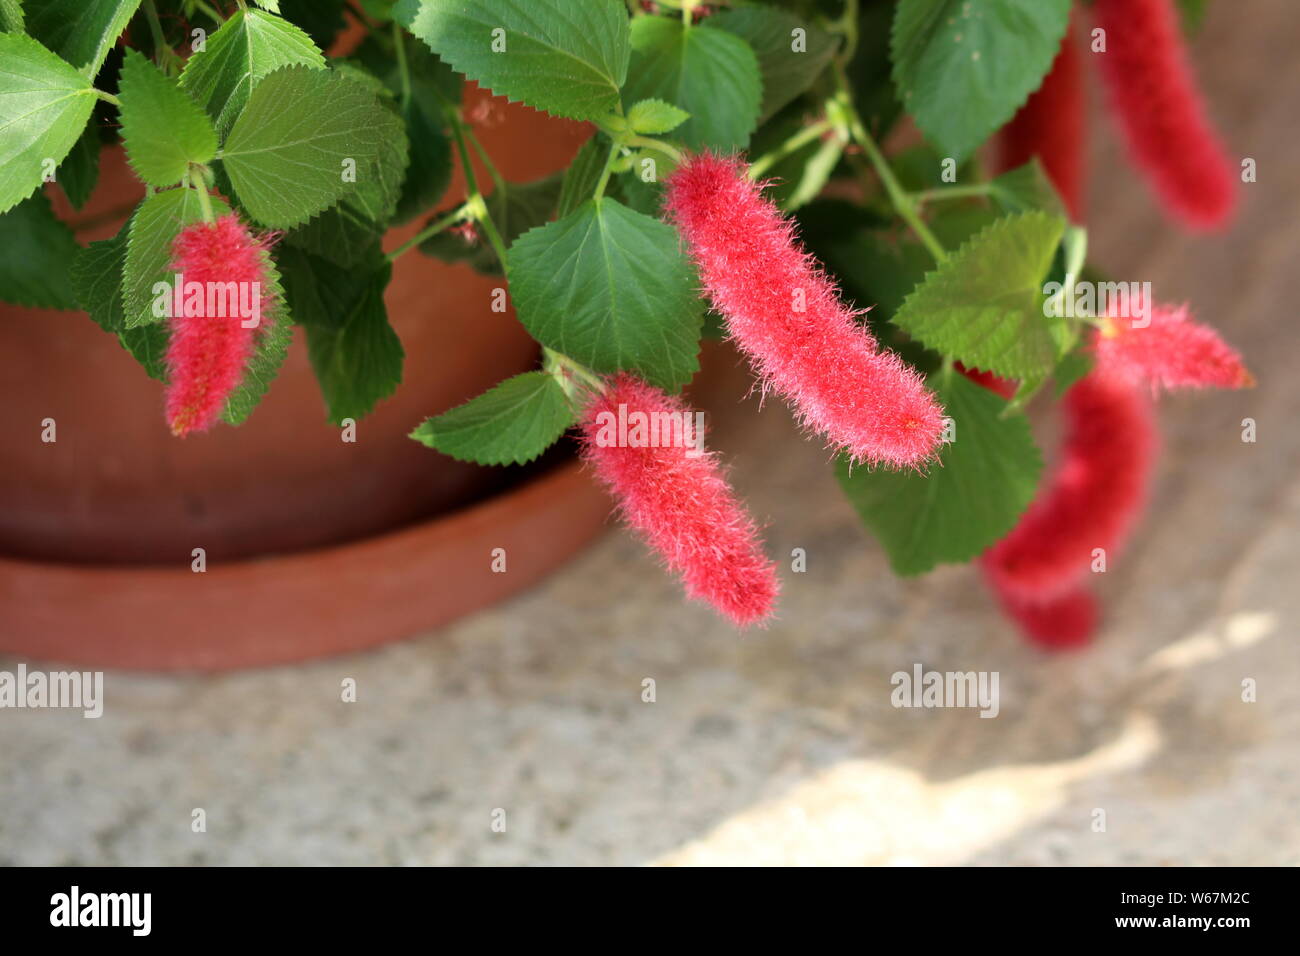 Red hot cat tails or Acalypha pendula or Firetail or Chenille plant with fluffy masses of bright red flower spikes growing from flower pot Stock Photo